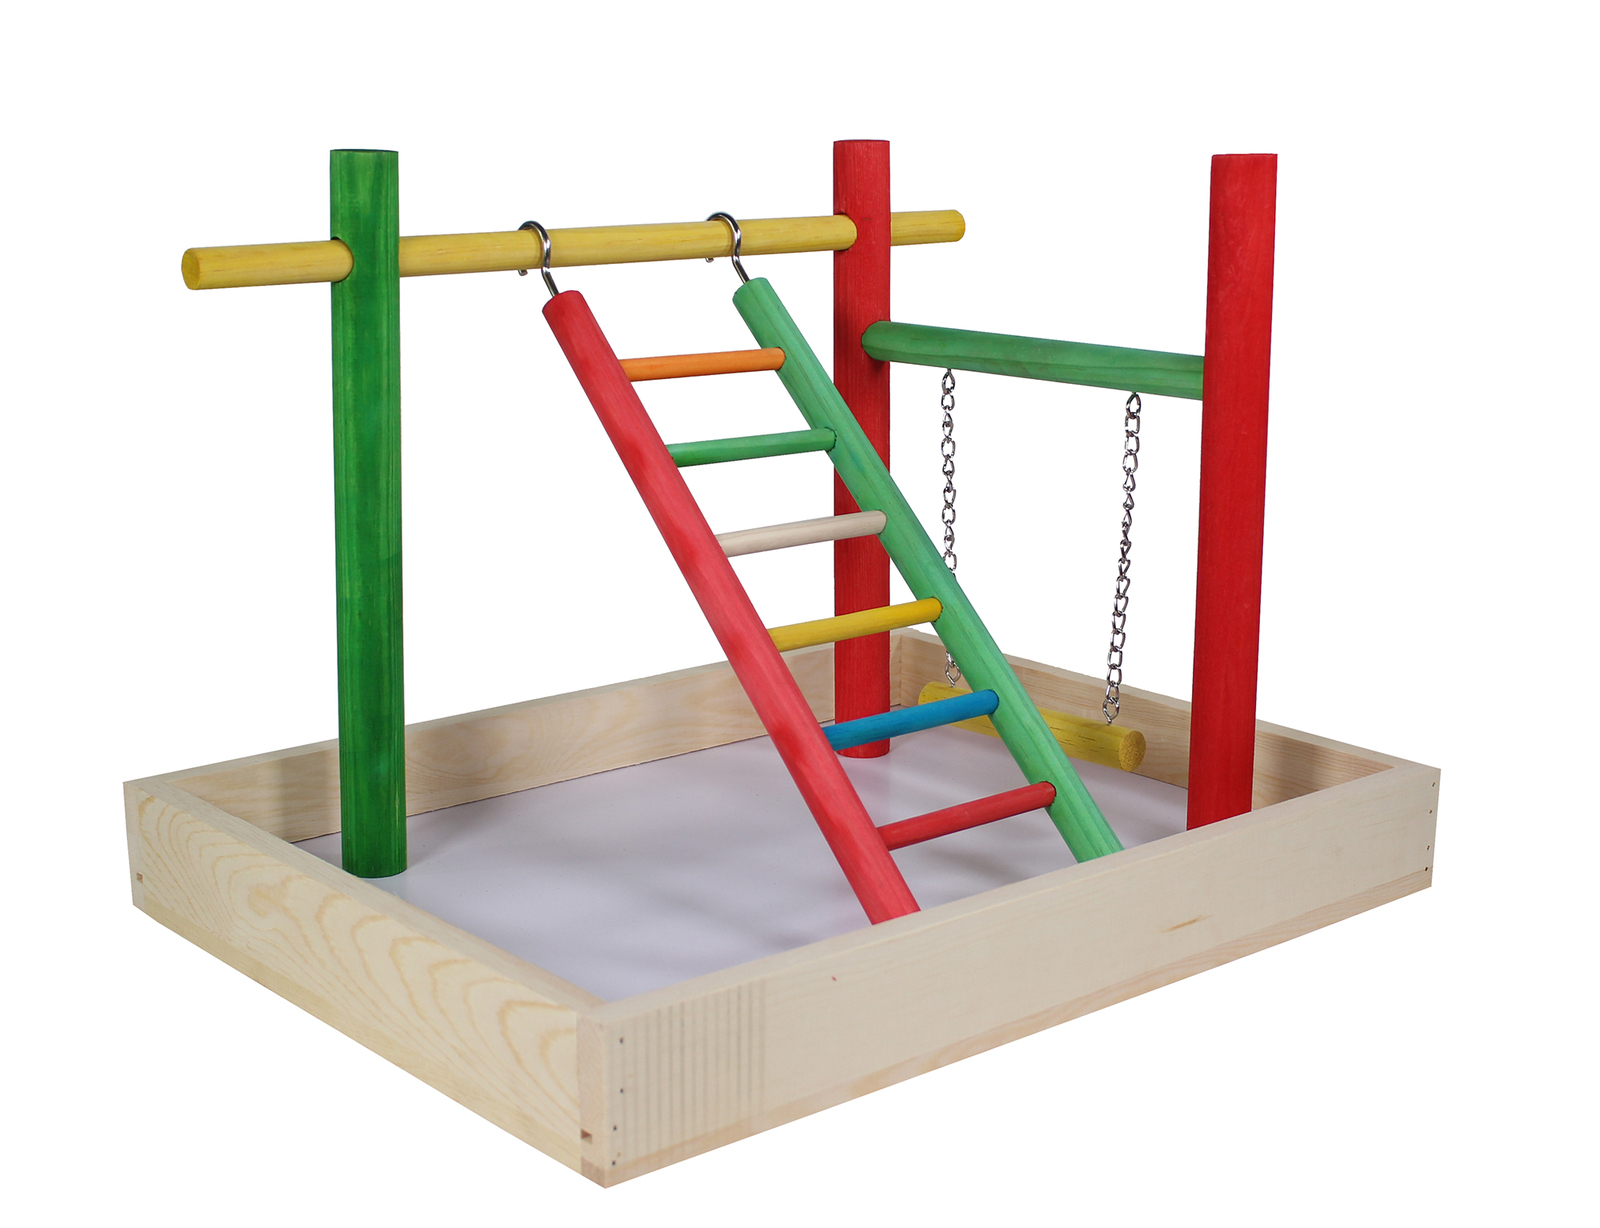 Penn-Plax Bird Life Wooden Playpen – Extra-Extra Large Size (Multicolor)